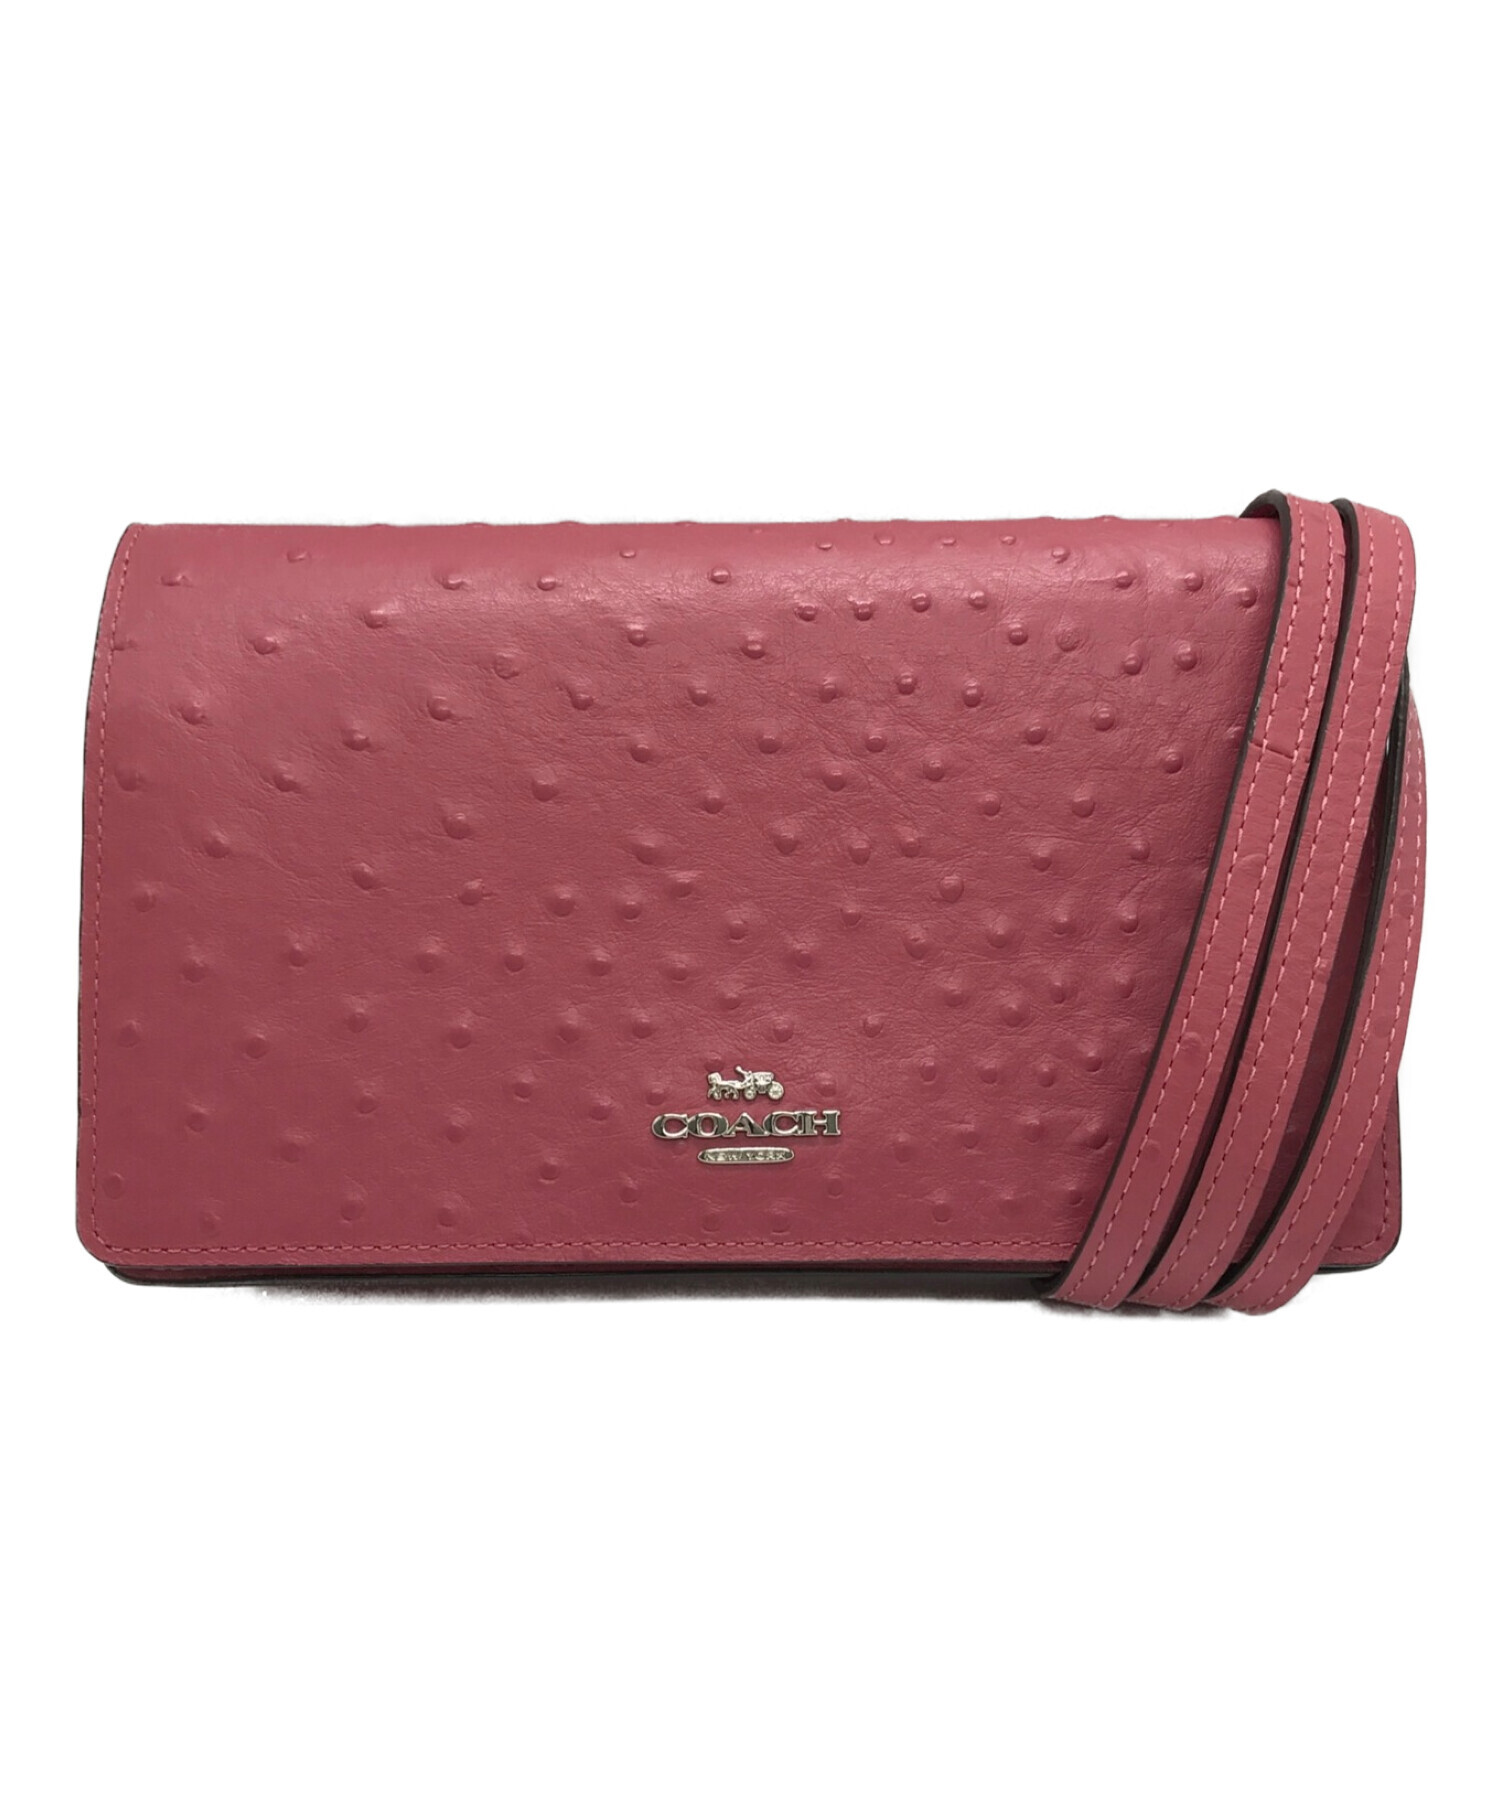 COACH (コーチ) OSTRICH EMBOSSED LEATHER FOLDOVER CROSSBODY BAG ピンク